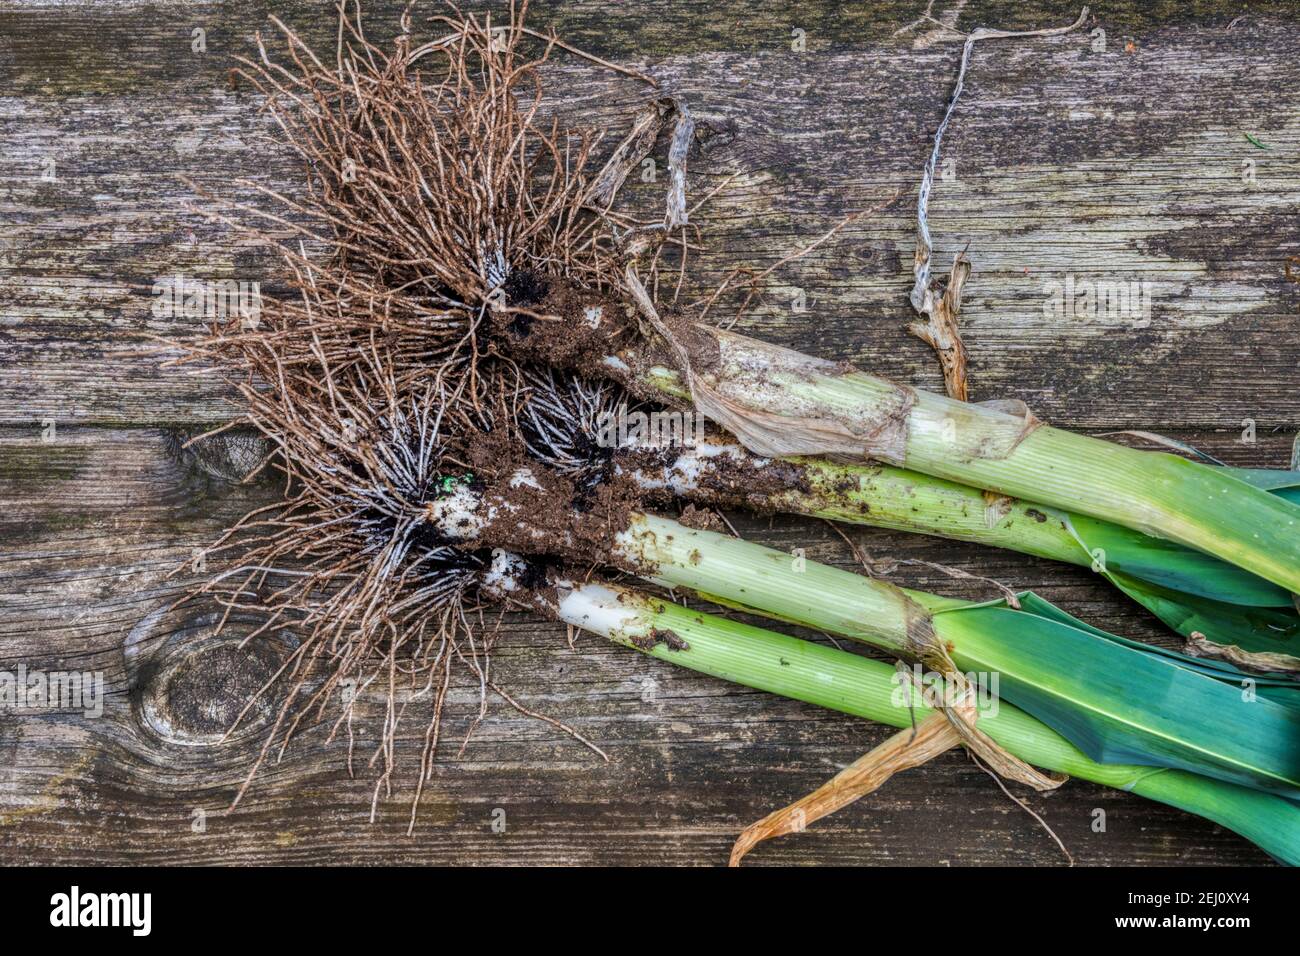 Home-grown leeks, freshly pulled for cooking. Stock Photo